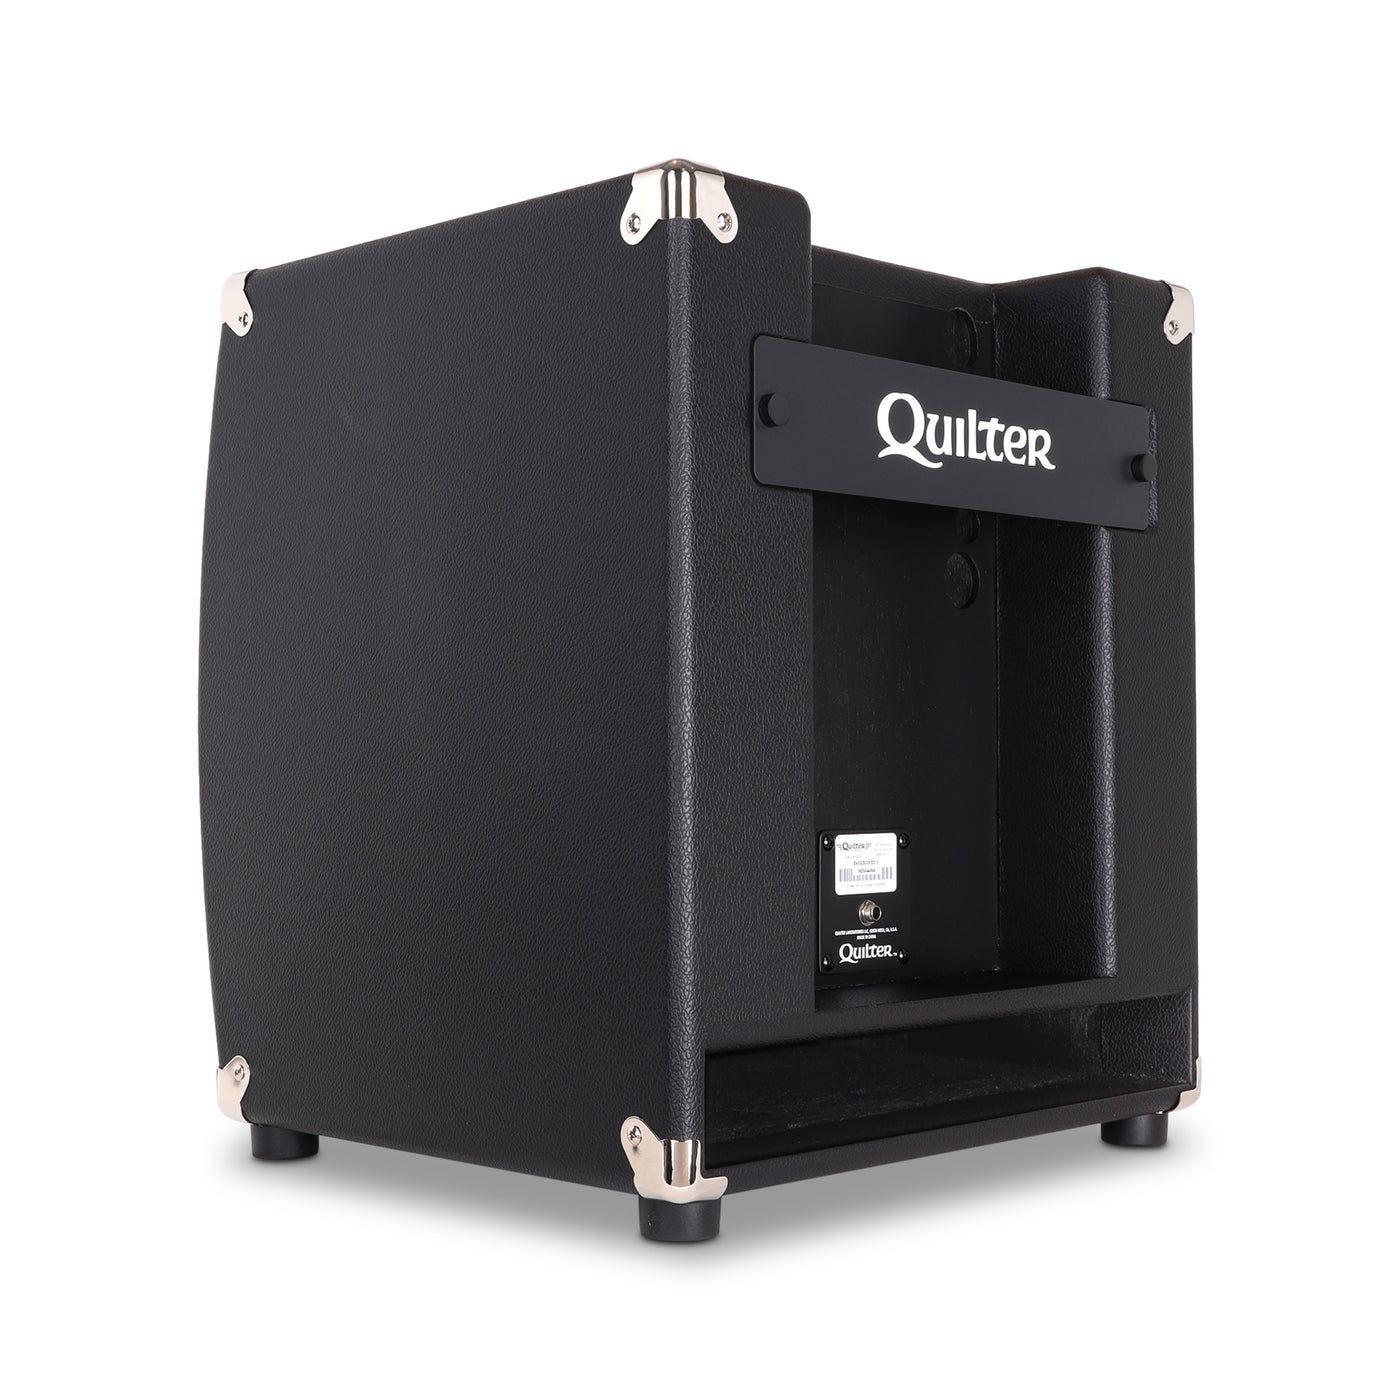 Quilter Labs BassDock 12 amplifier cabinet - facing away diagonally to the left